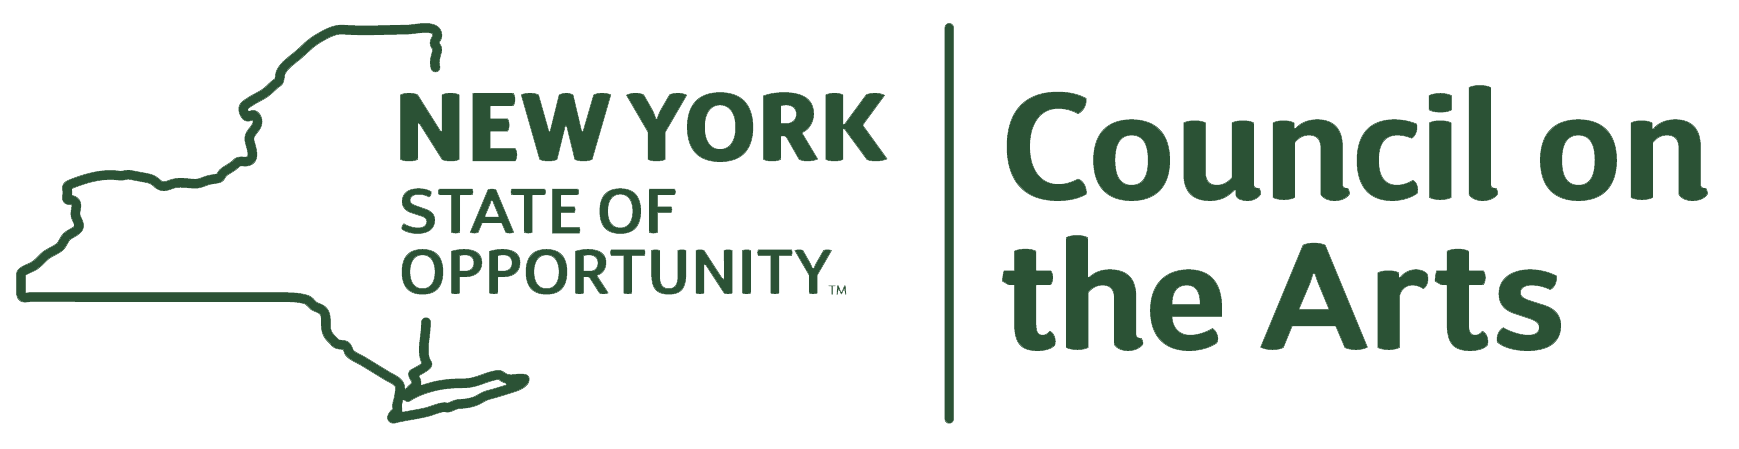 Image result for new york state council on the arts logo